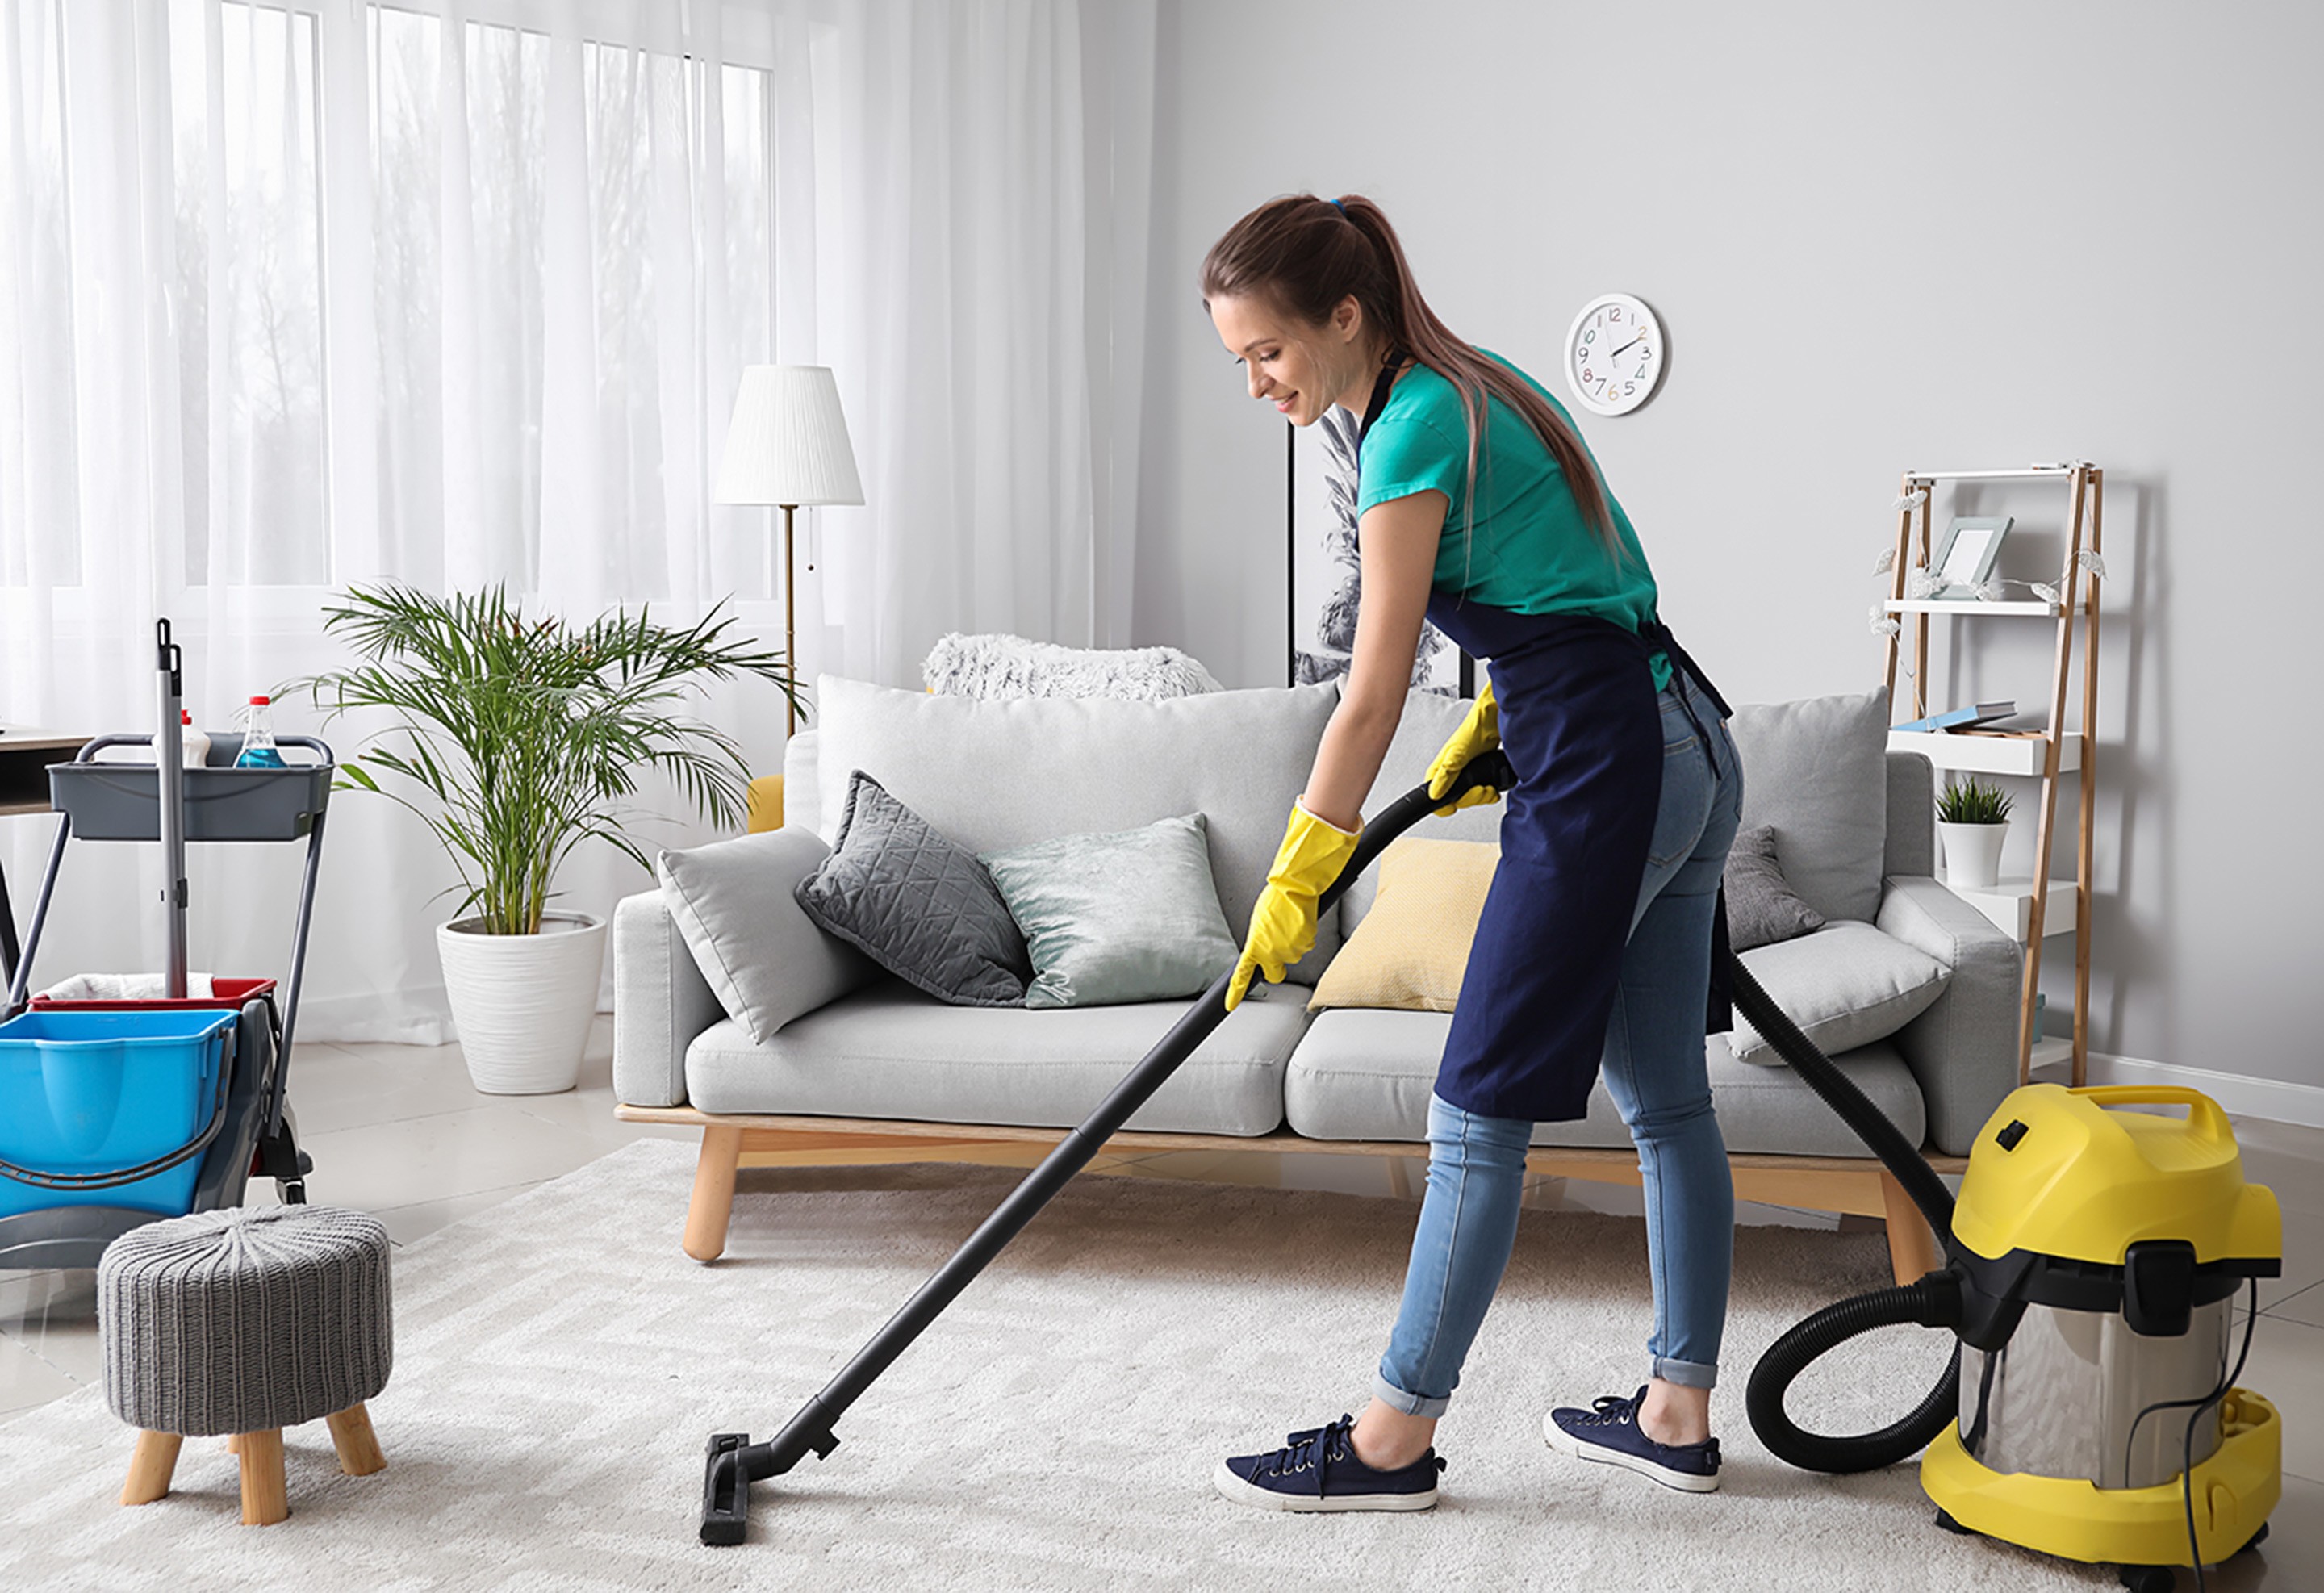 Boost Home Cleaning Power: Discover Top Floor & Carpet Solutions